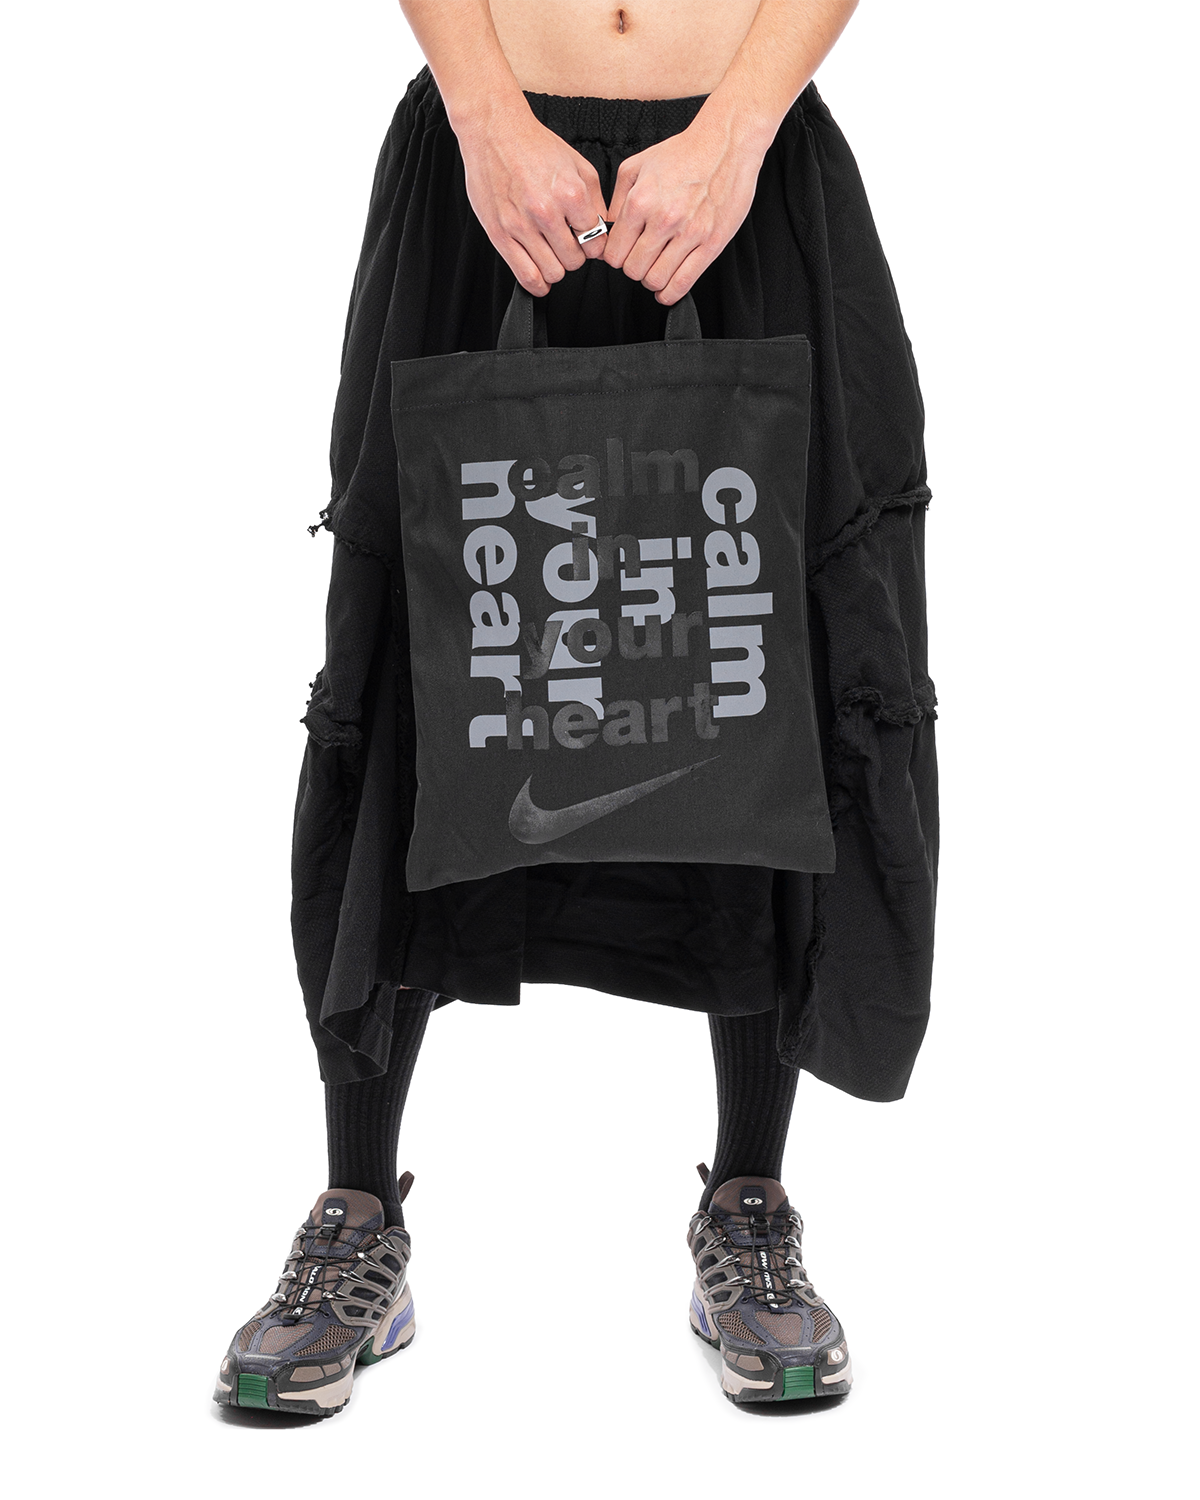 Comme des Garçons Nike Edition Calm in Your Heart Tote